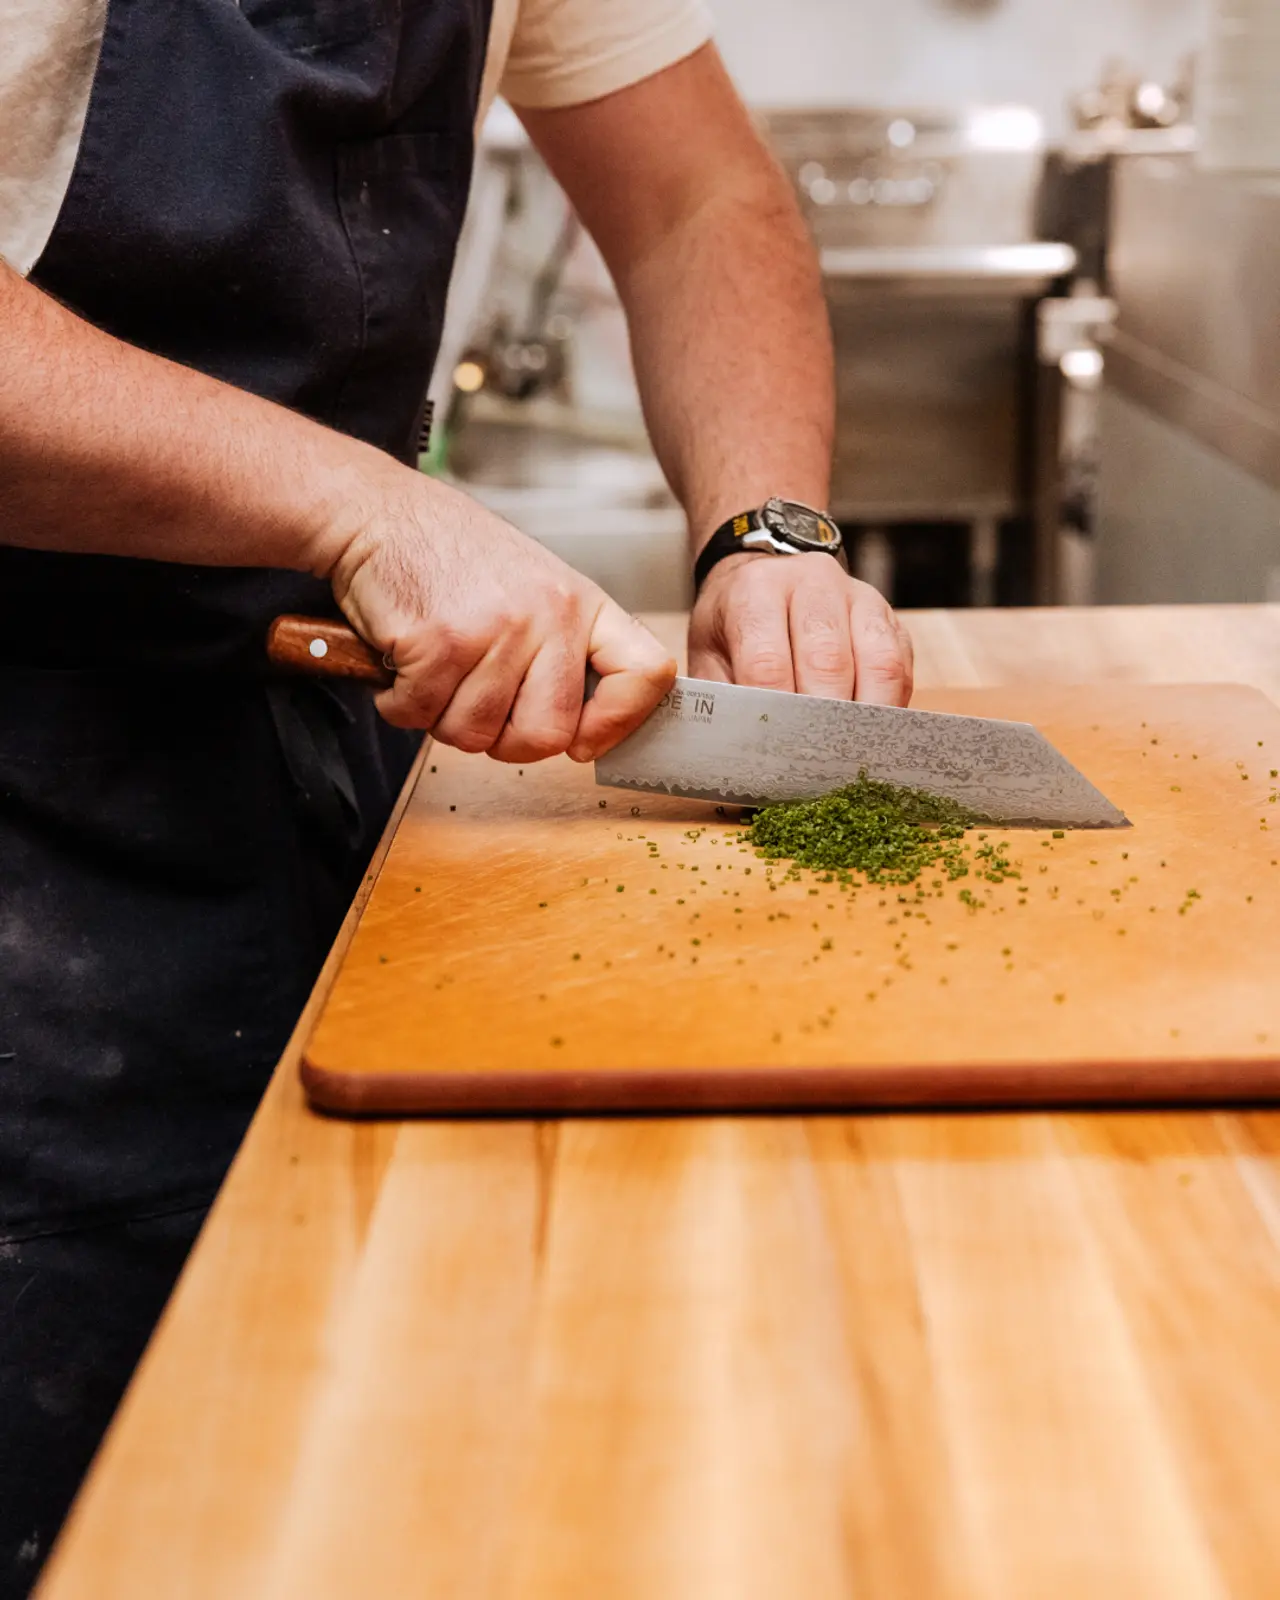 A person in an apron finely chops herbs on a wooden cutting board with a large chef's knife.